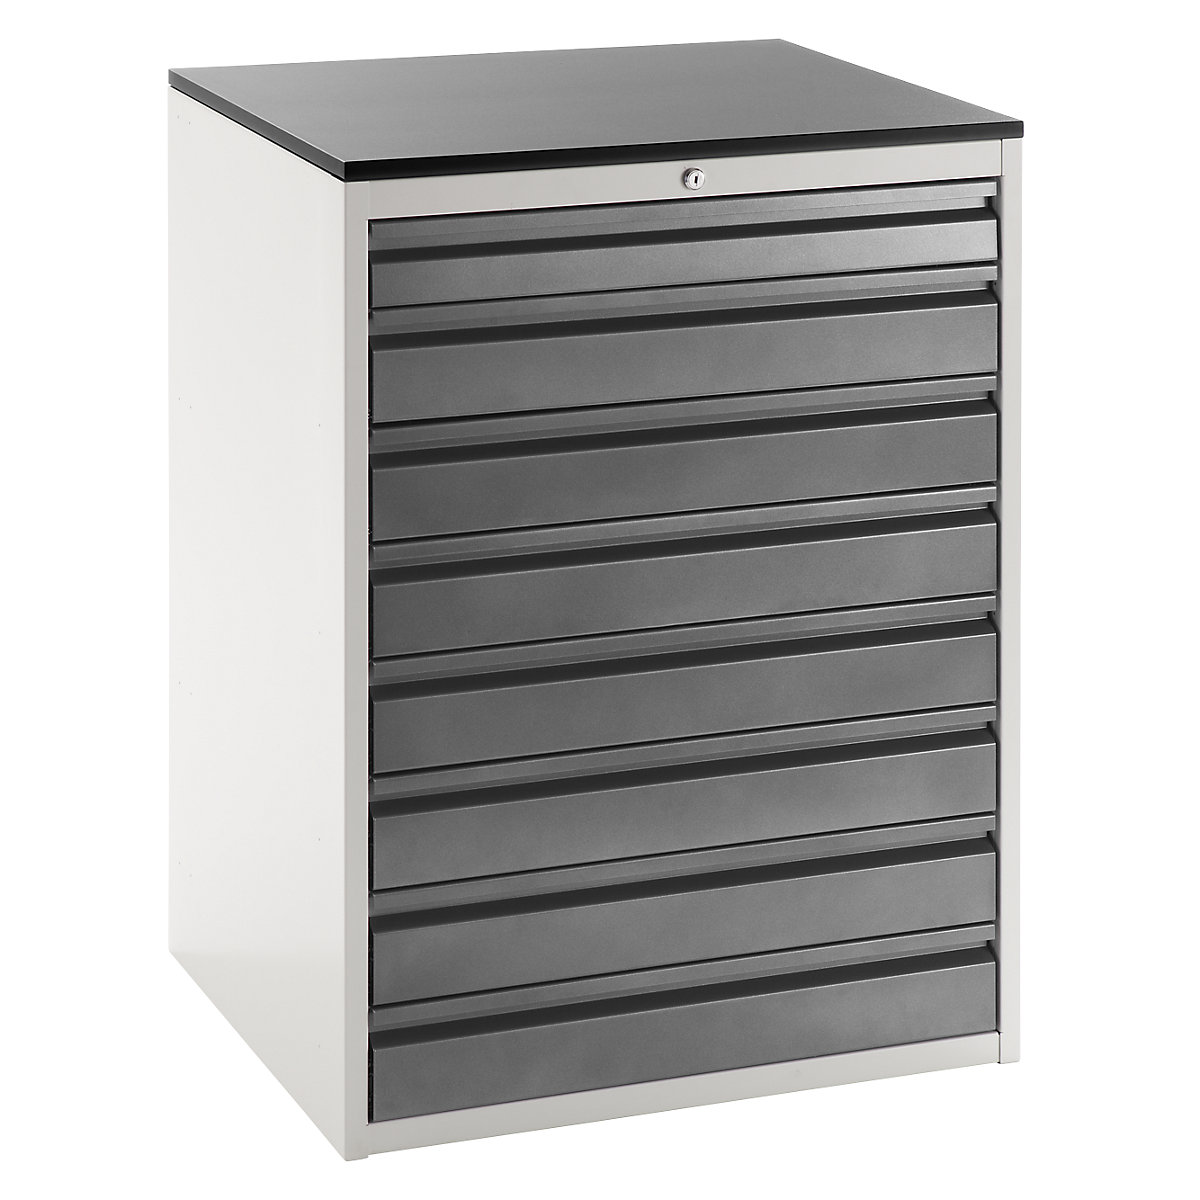 Drawer cupboard with telescopic guides – RAU, height 1030 mm, drawers: 1 x 90, 7 x 120 mm, light grey / charcoal, width 770 mm-6